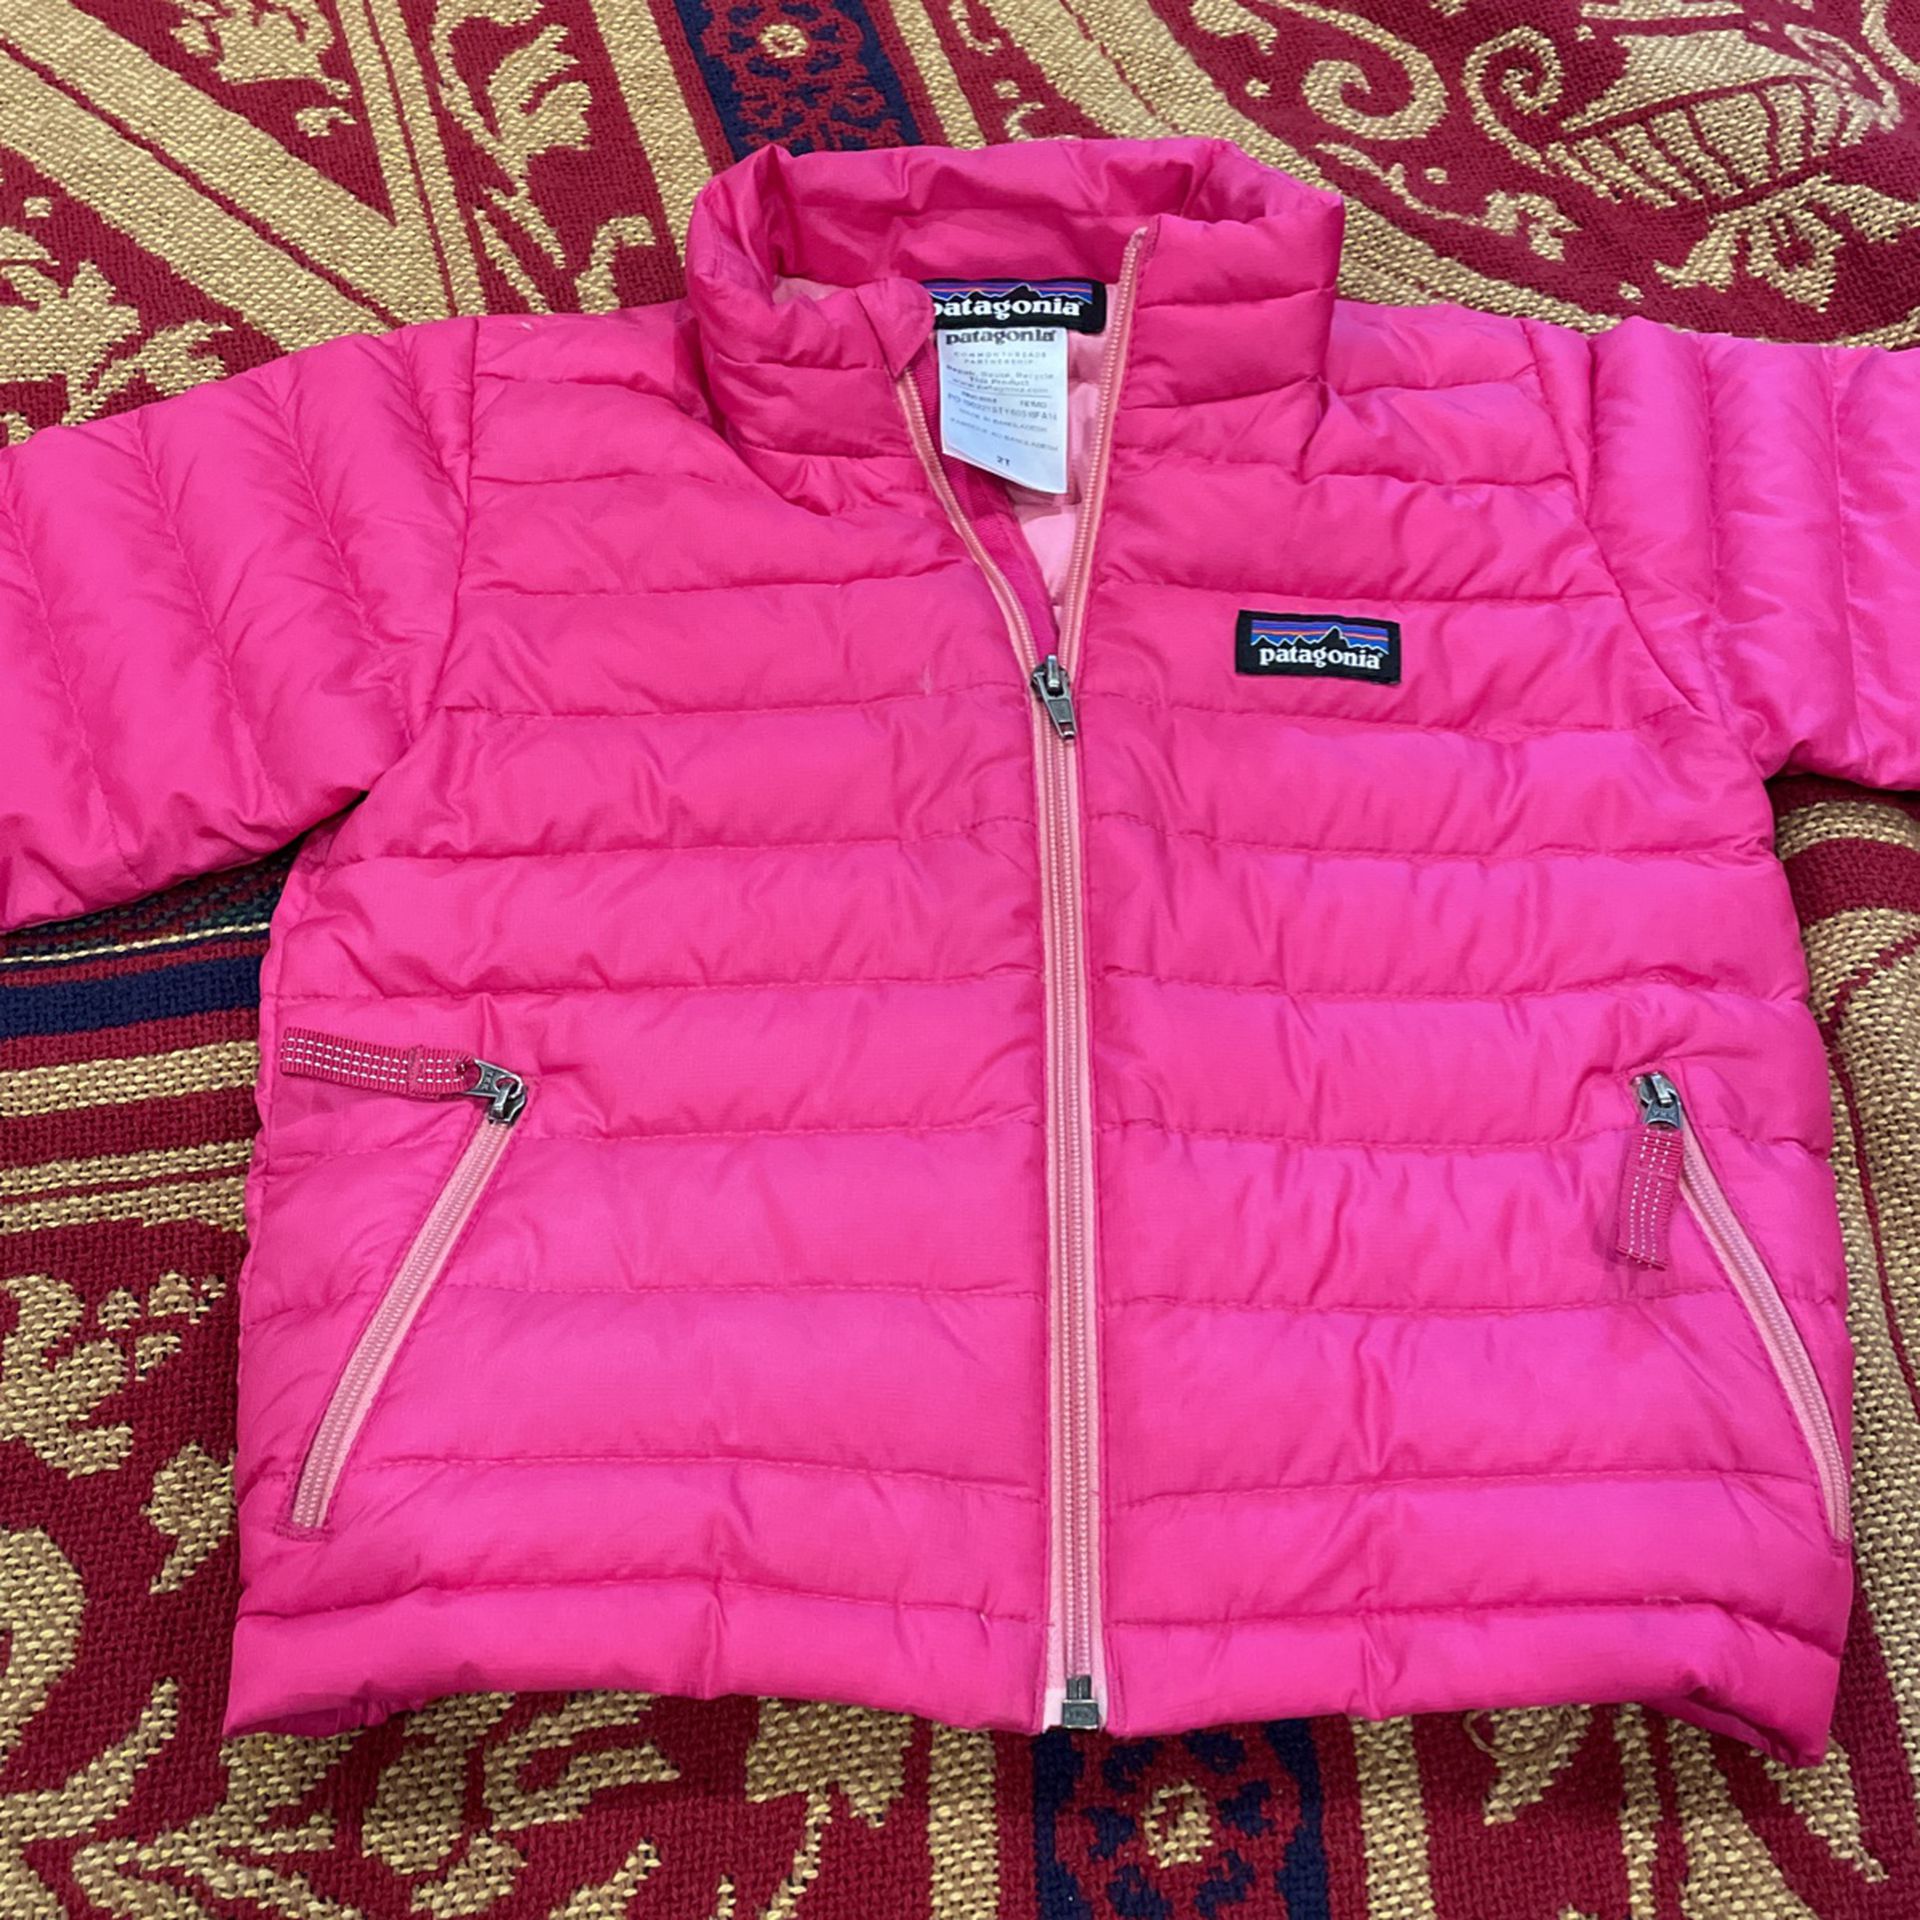 Good Condition 2T Pink Patagonia Coat